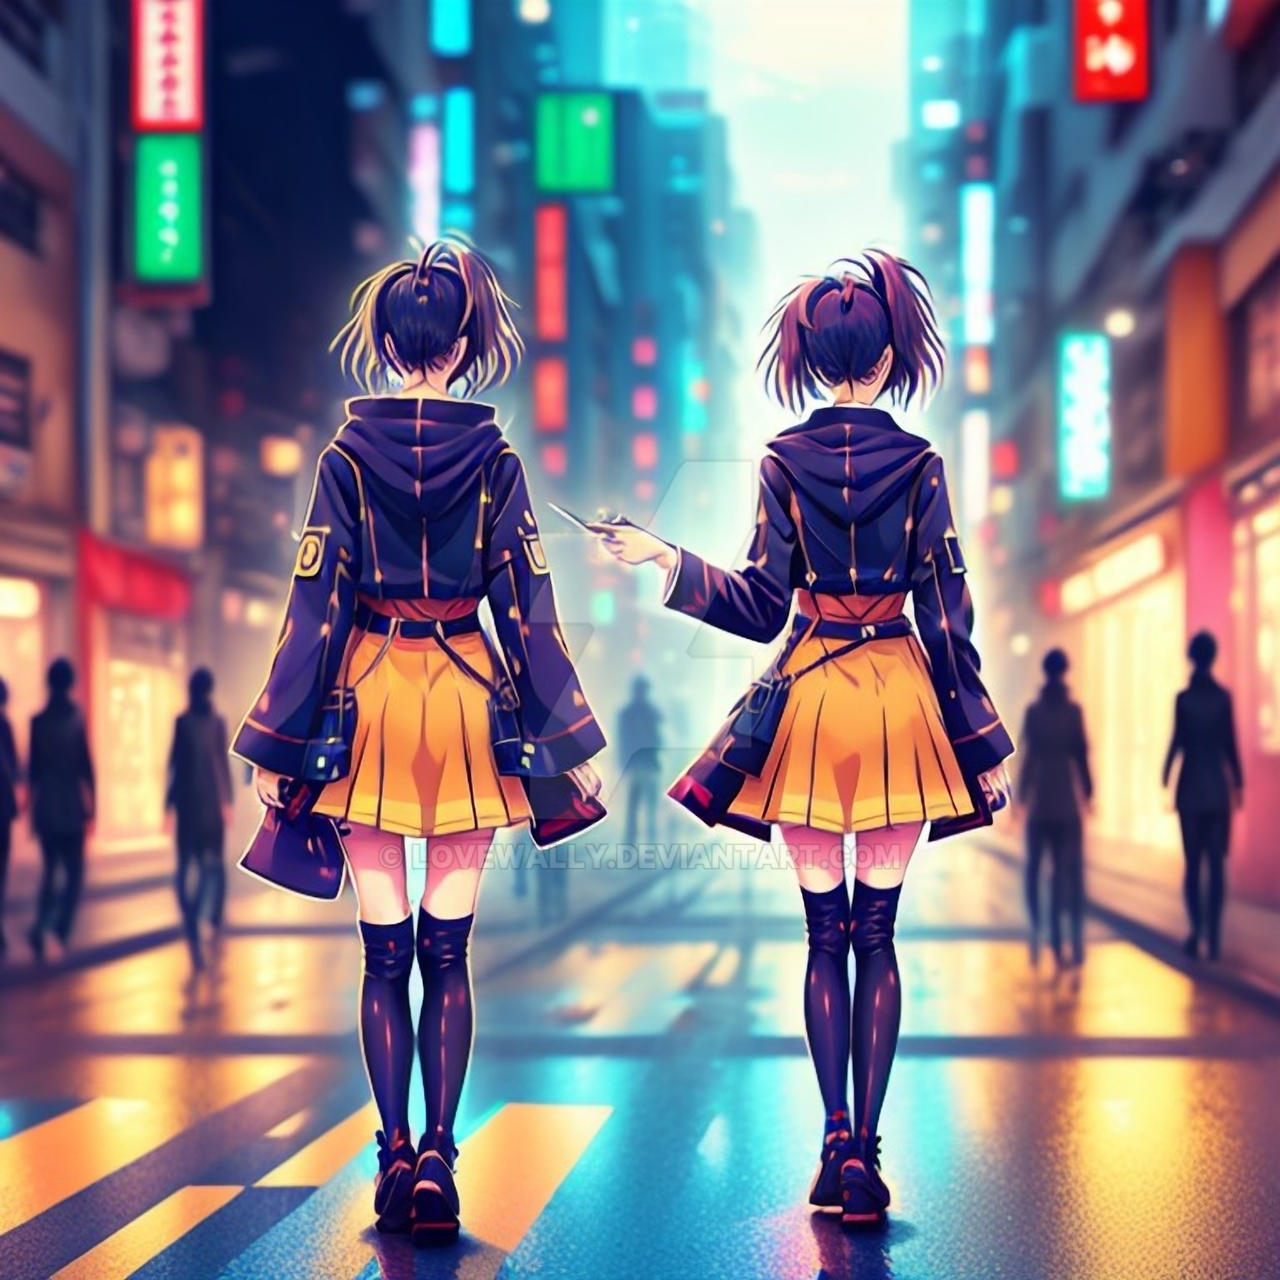 Anime-hd-wallpapers-66849-268131 by RevandVoey on DeviantArt